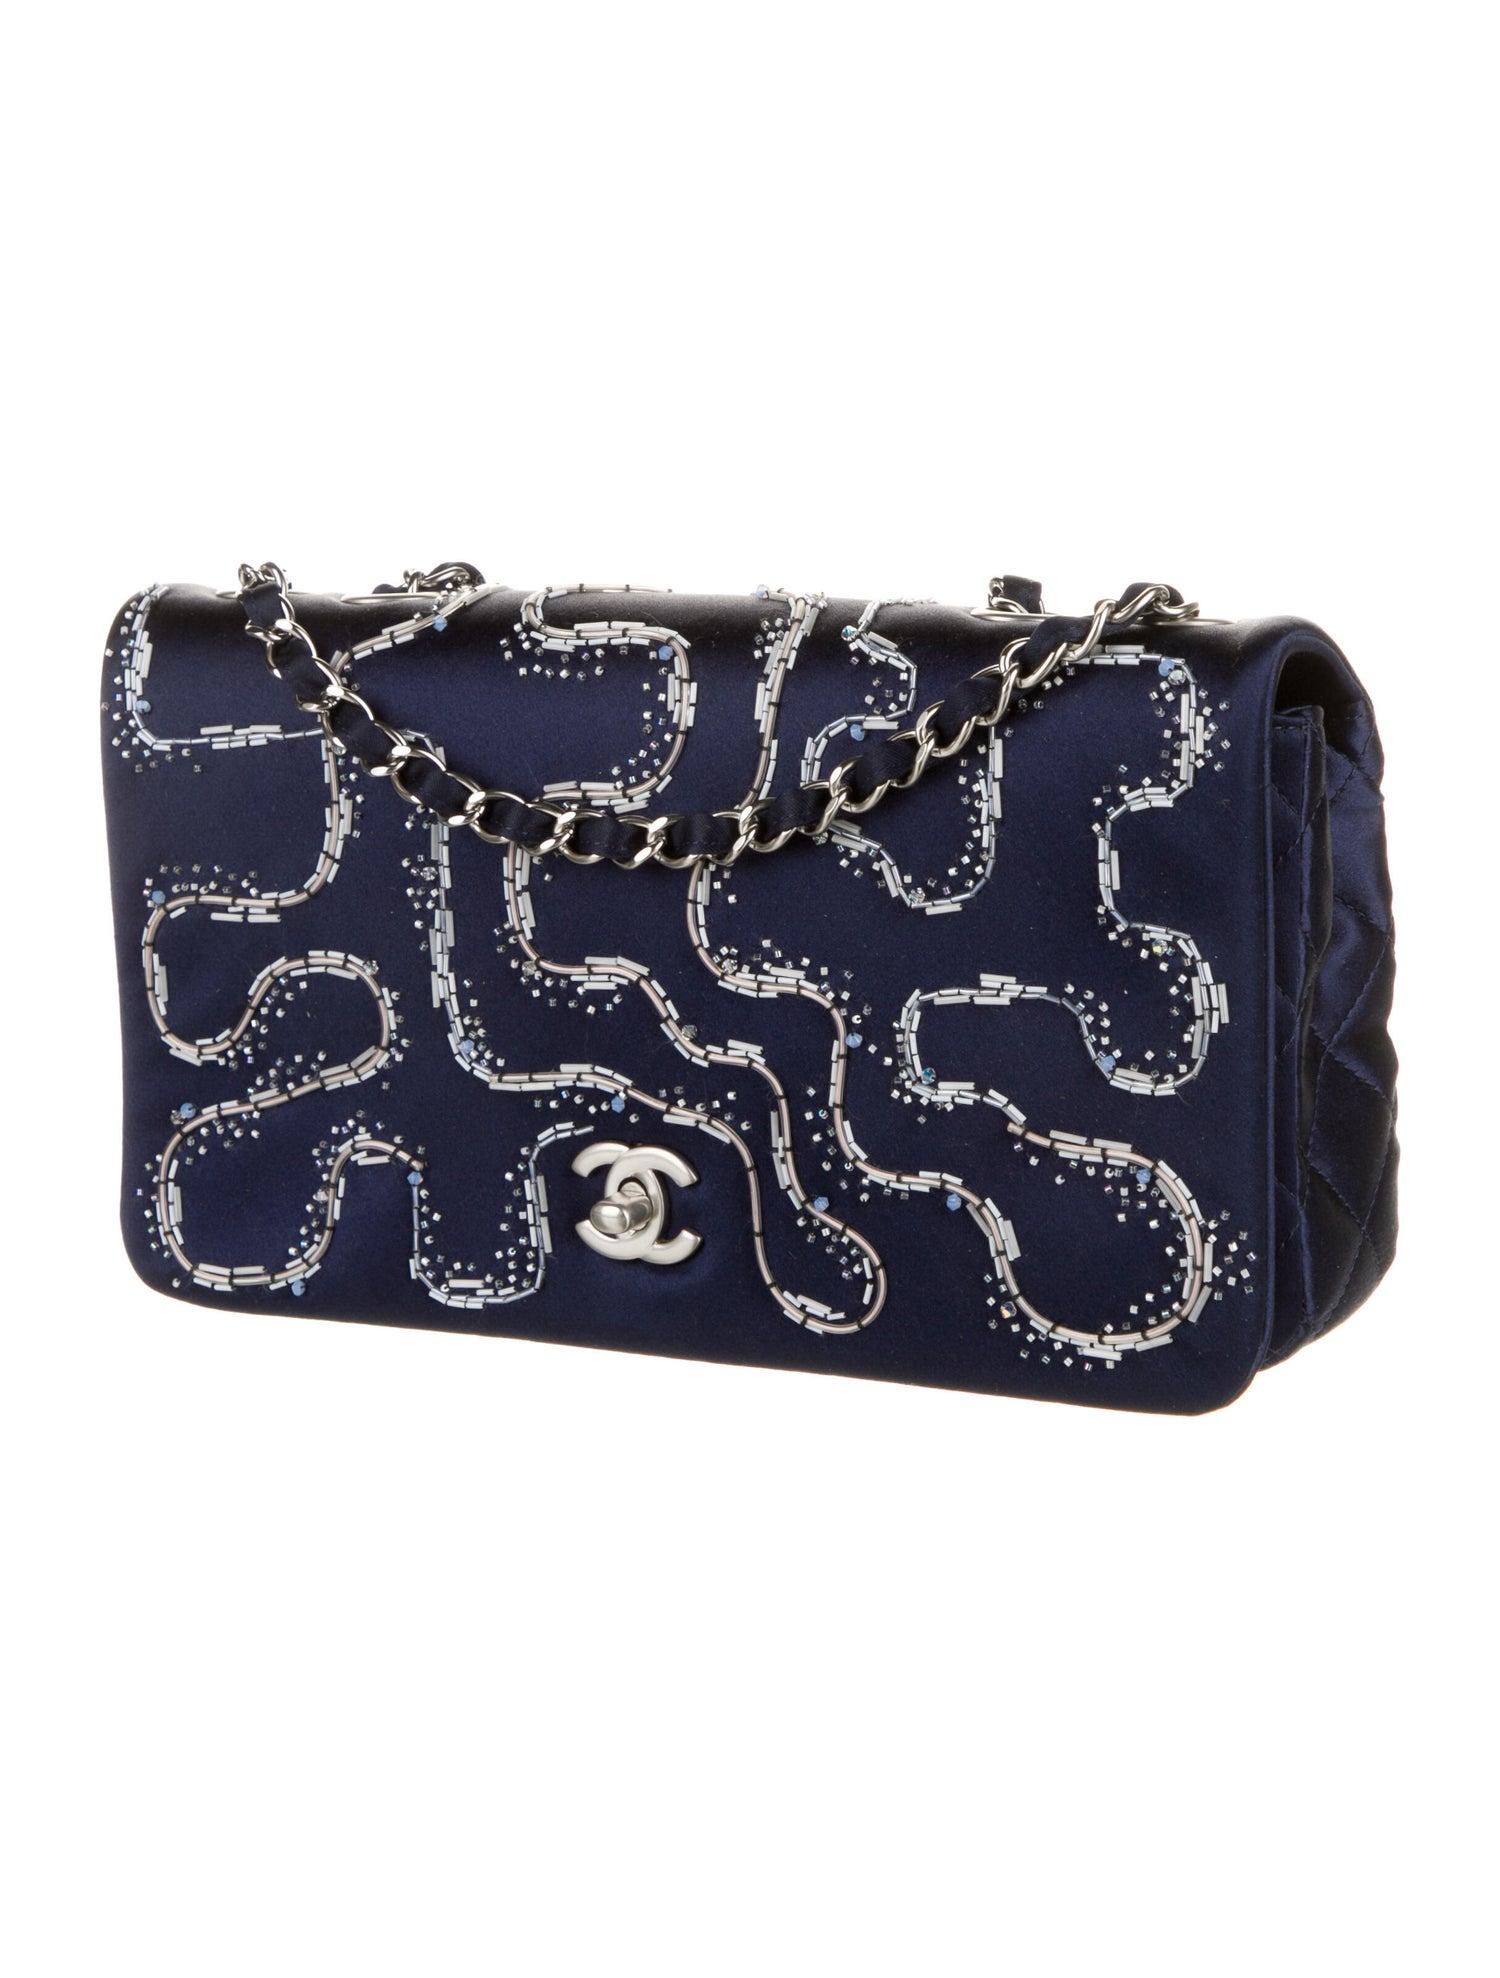 Chanel Rare Quilted Embellished Satin Blue Illuminating Medium Classic Flap Bag

From the Cruise 2015 Collection by Karl Lagerfeld
Blue
Interlocking CC Logo
Silver-Tone Hardware
Chain-Link Shoulder Strap
Beaded Accents & Single Exterior Pocket
Satin